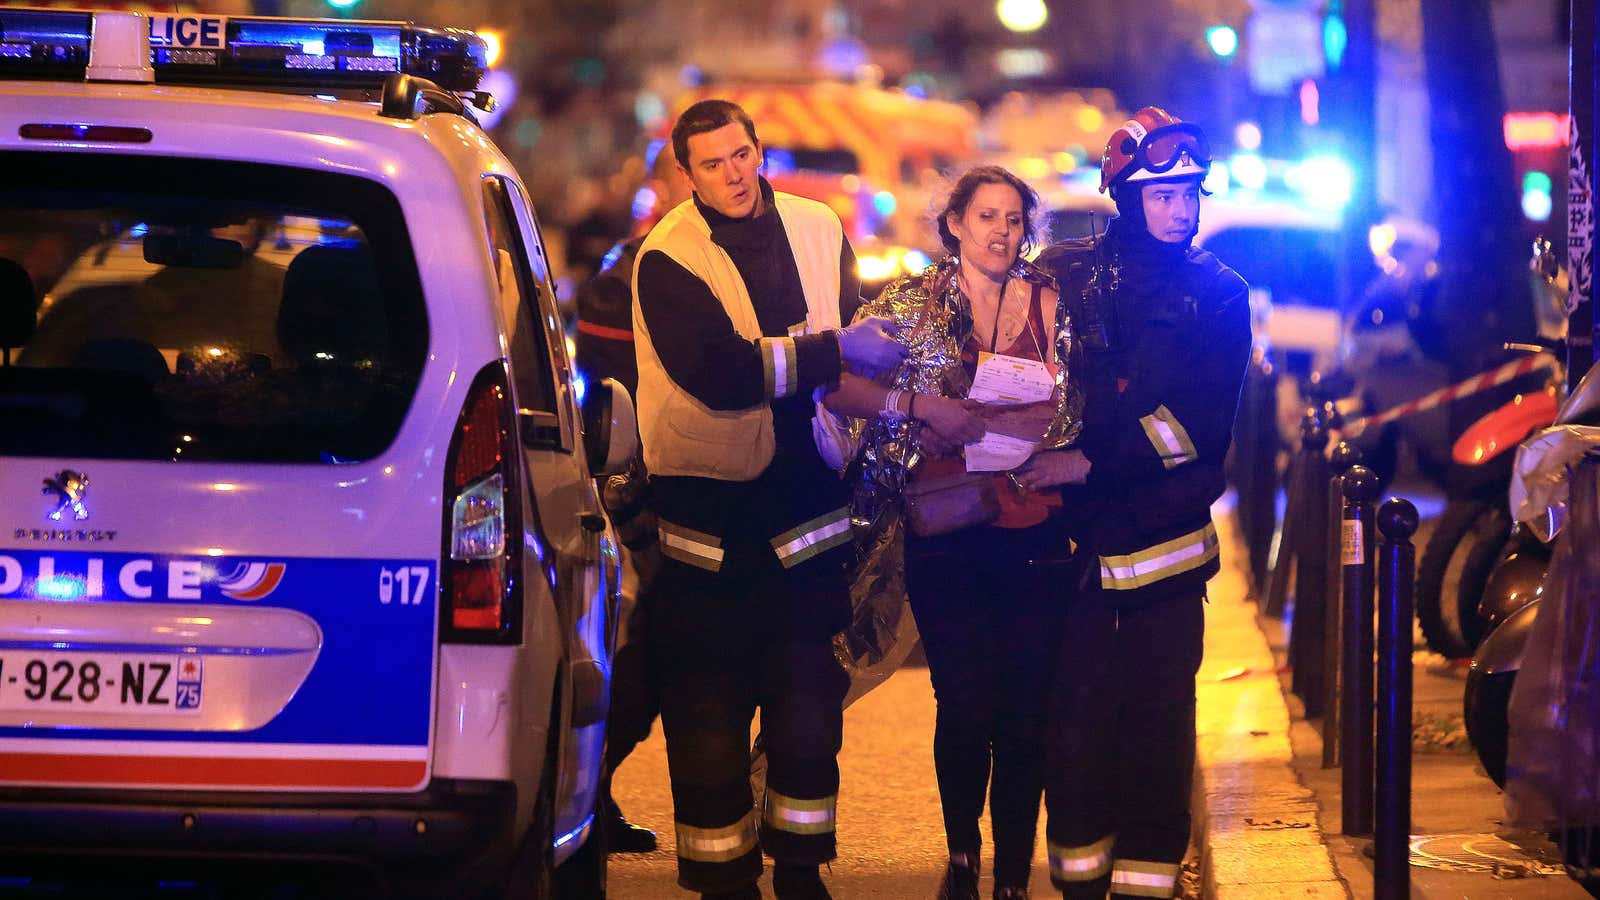 Rescue workers help a woman after an attack outside the Bataclan theater in Paris.